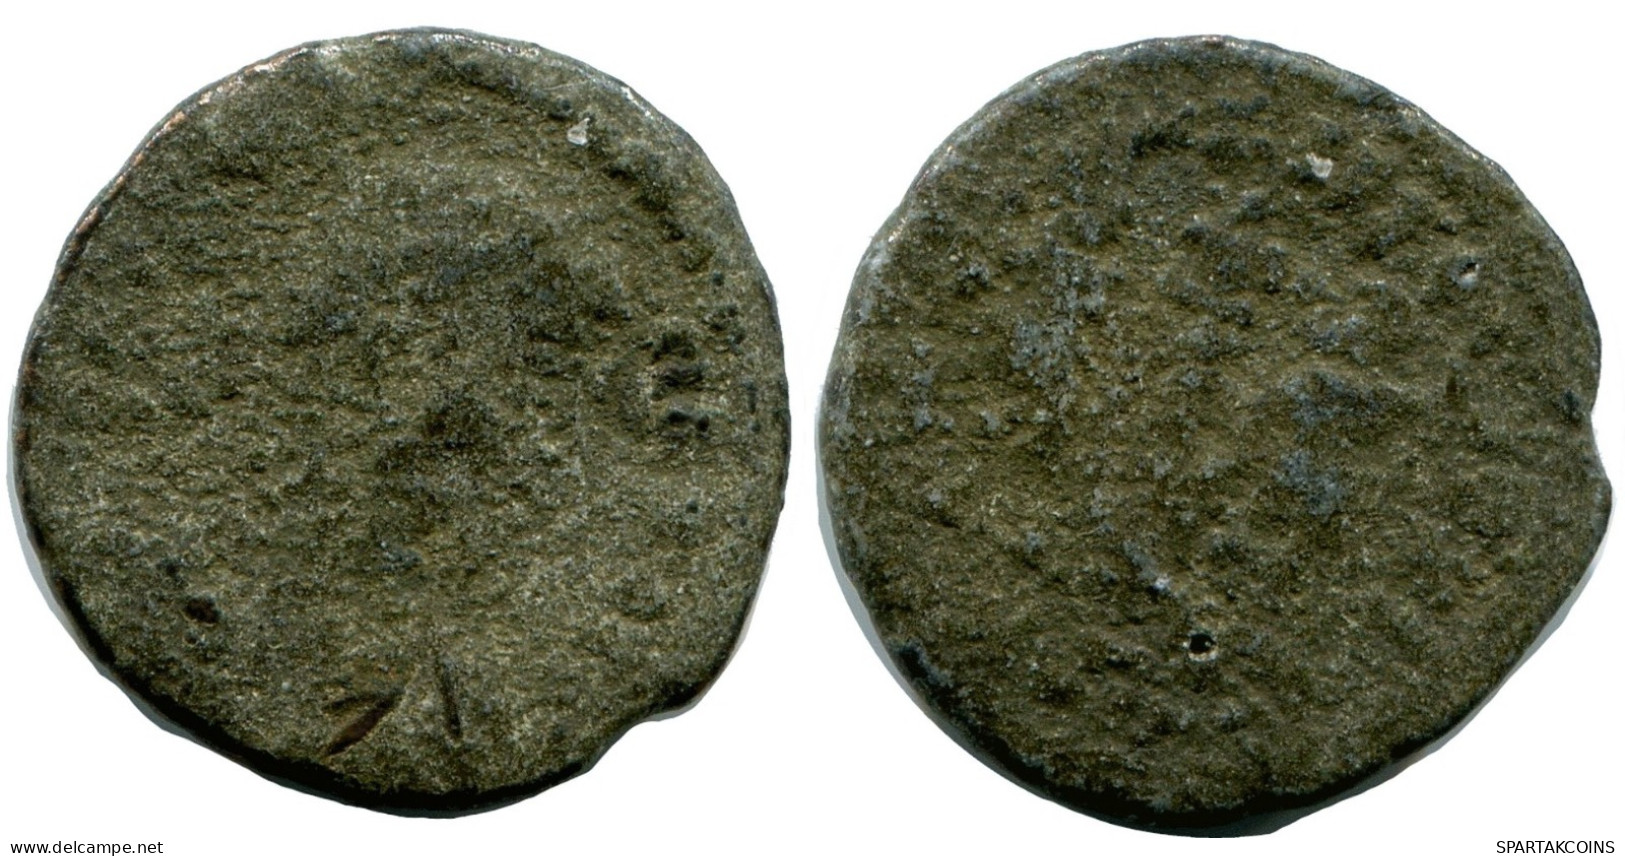 ROMAN Coin MINTED IN ALEKSANDRIA FROM THE ROYAL ONTARIO MUSEUM #ANC10186.14.D.A - The Christian Empire (307 AD Tot 363 AD)